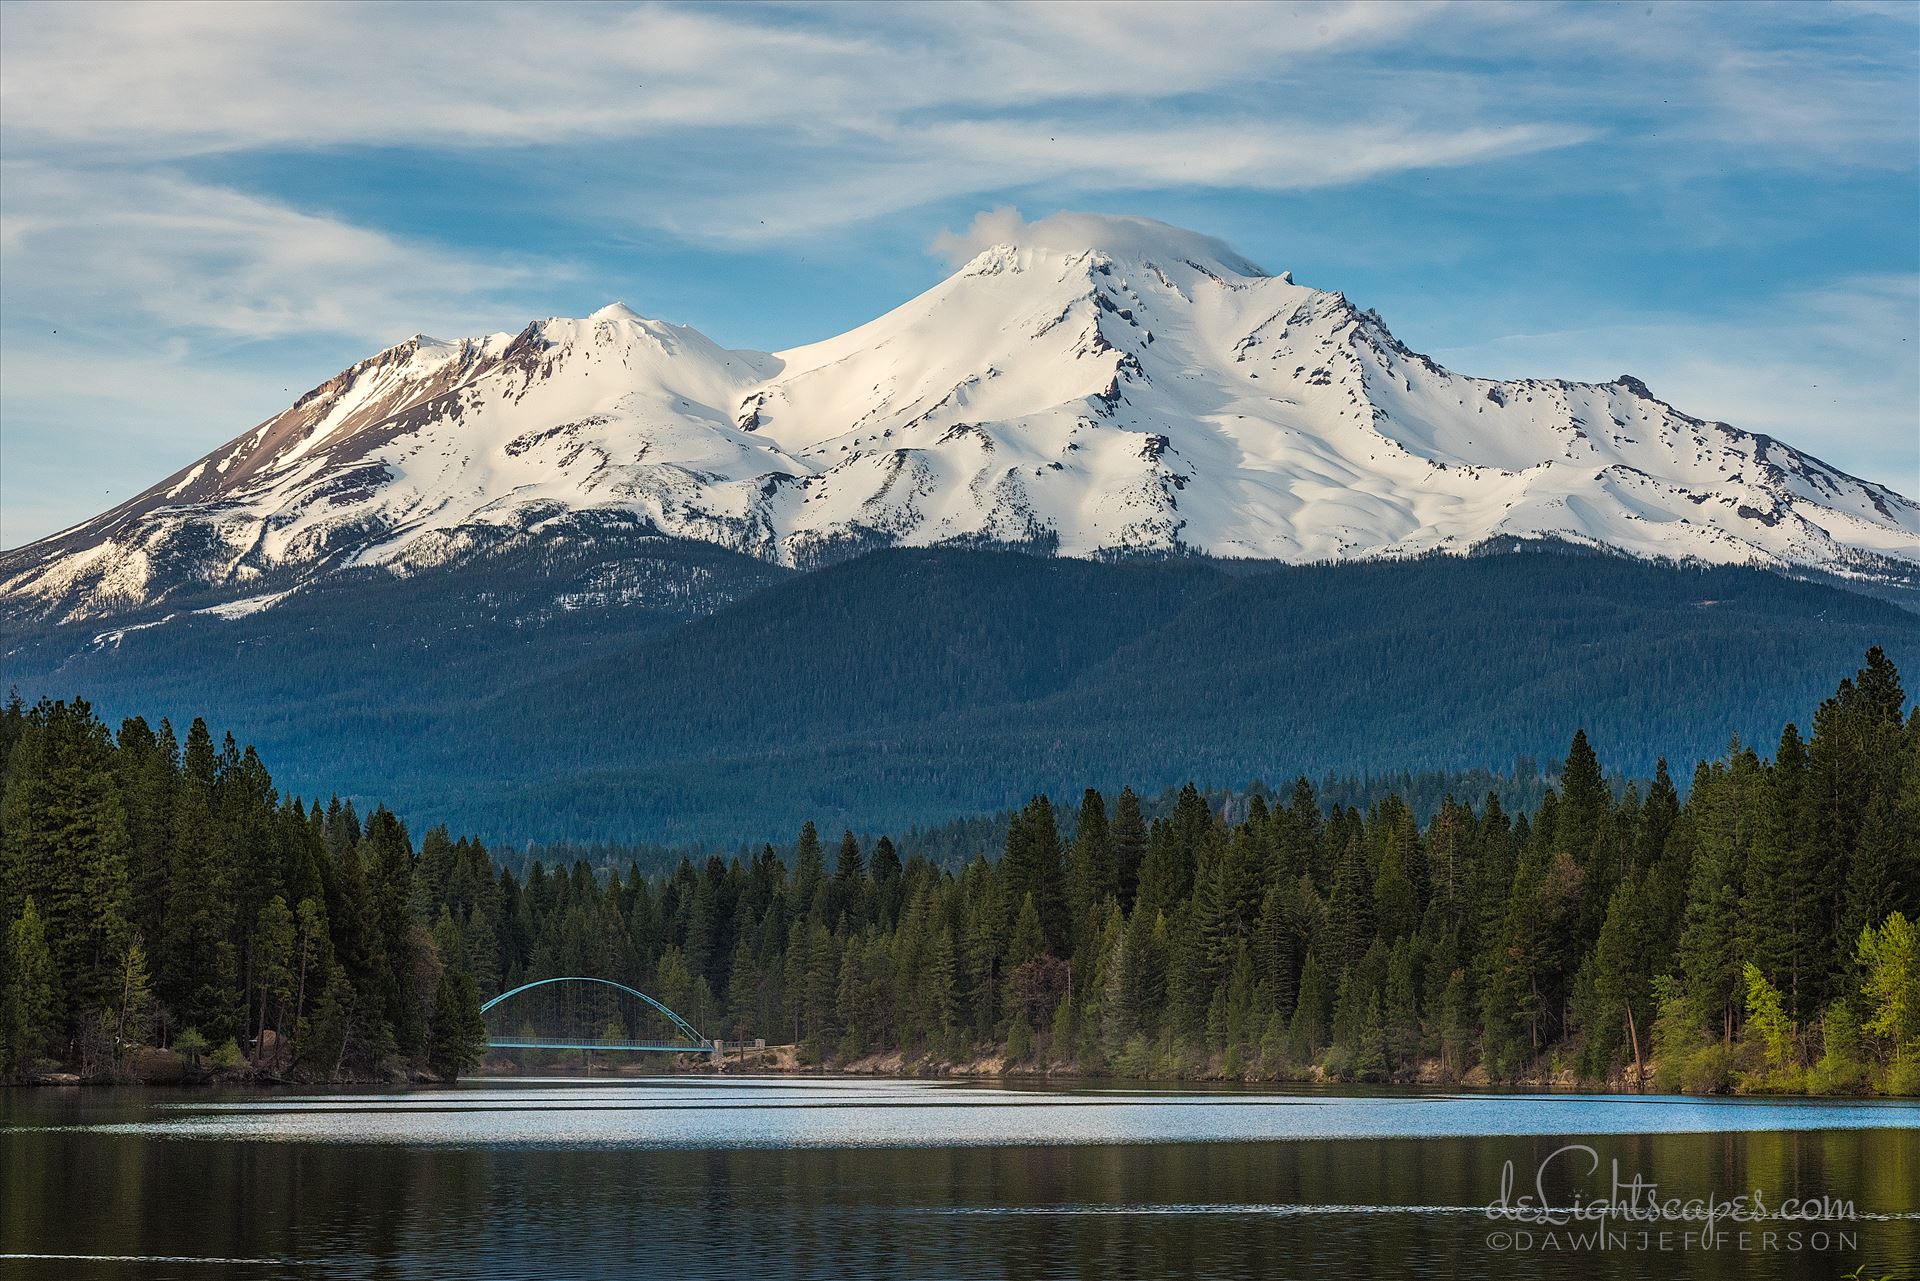 Mt Shasta from the Lake. - Mt Shasta view and pedestrian footbridge from the lake by Dawn Jefferson